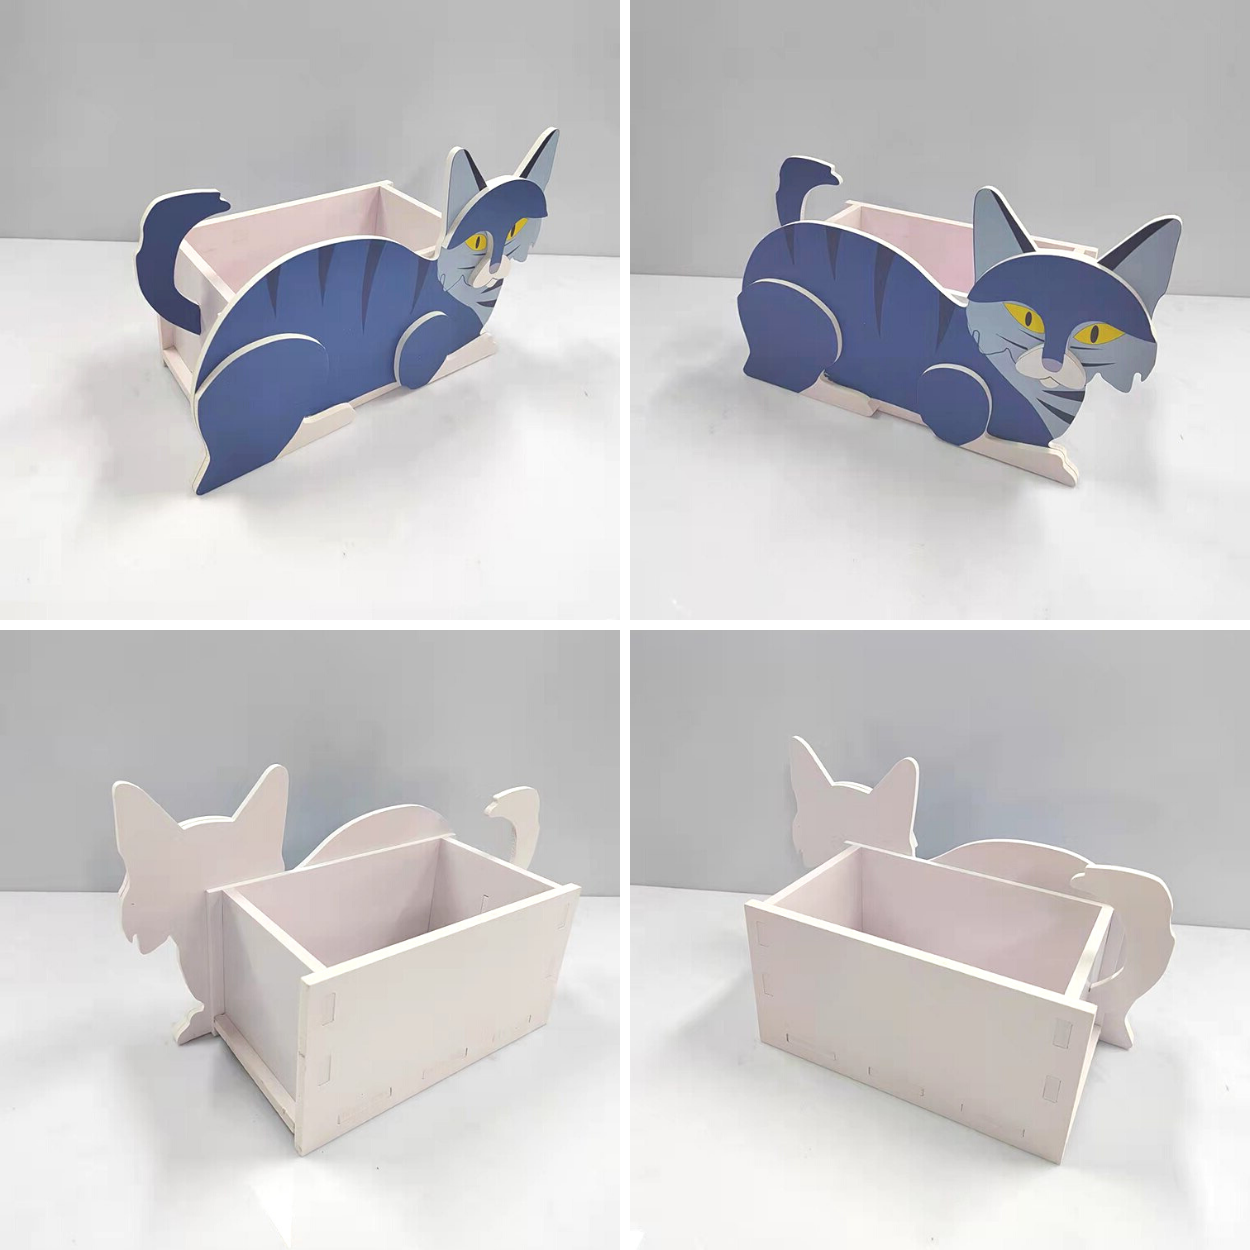 Cat Planters for garden and home decor